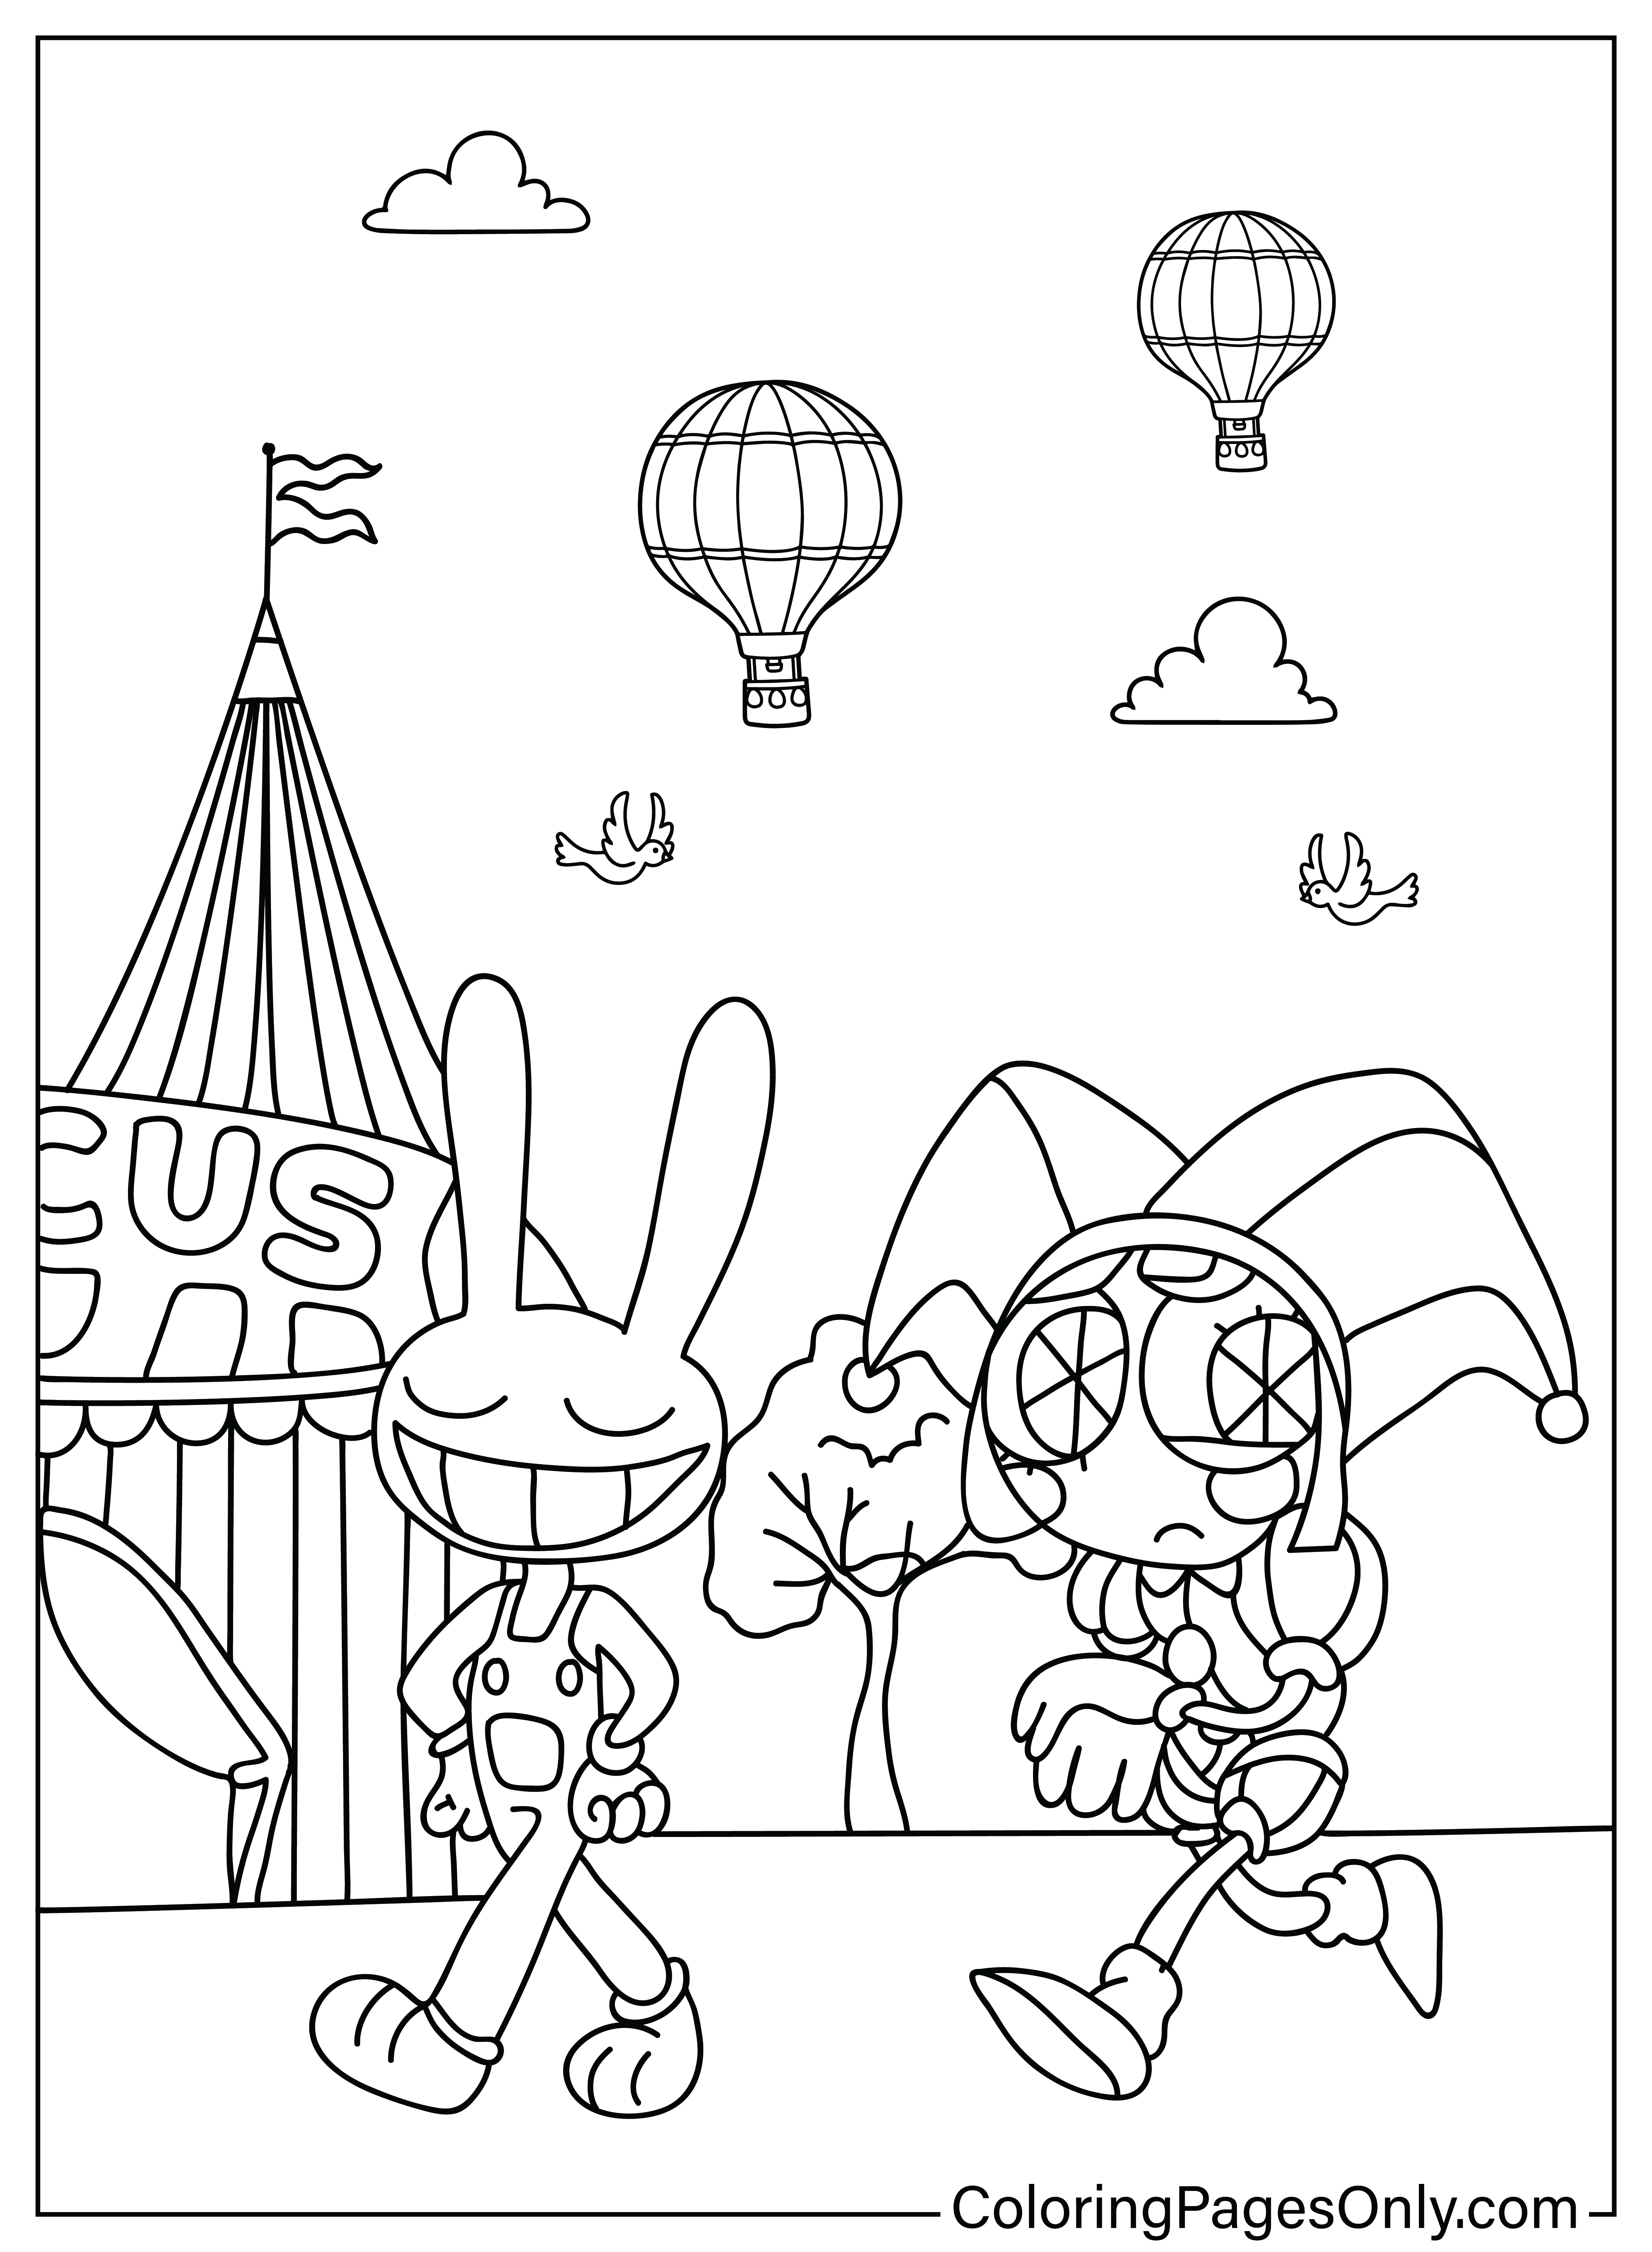 Pomni, Jax Coloring Page from The Amazing Digital Circus